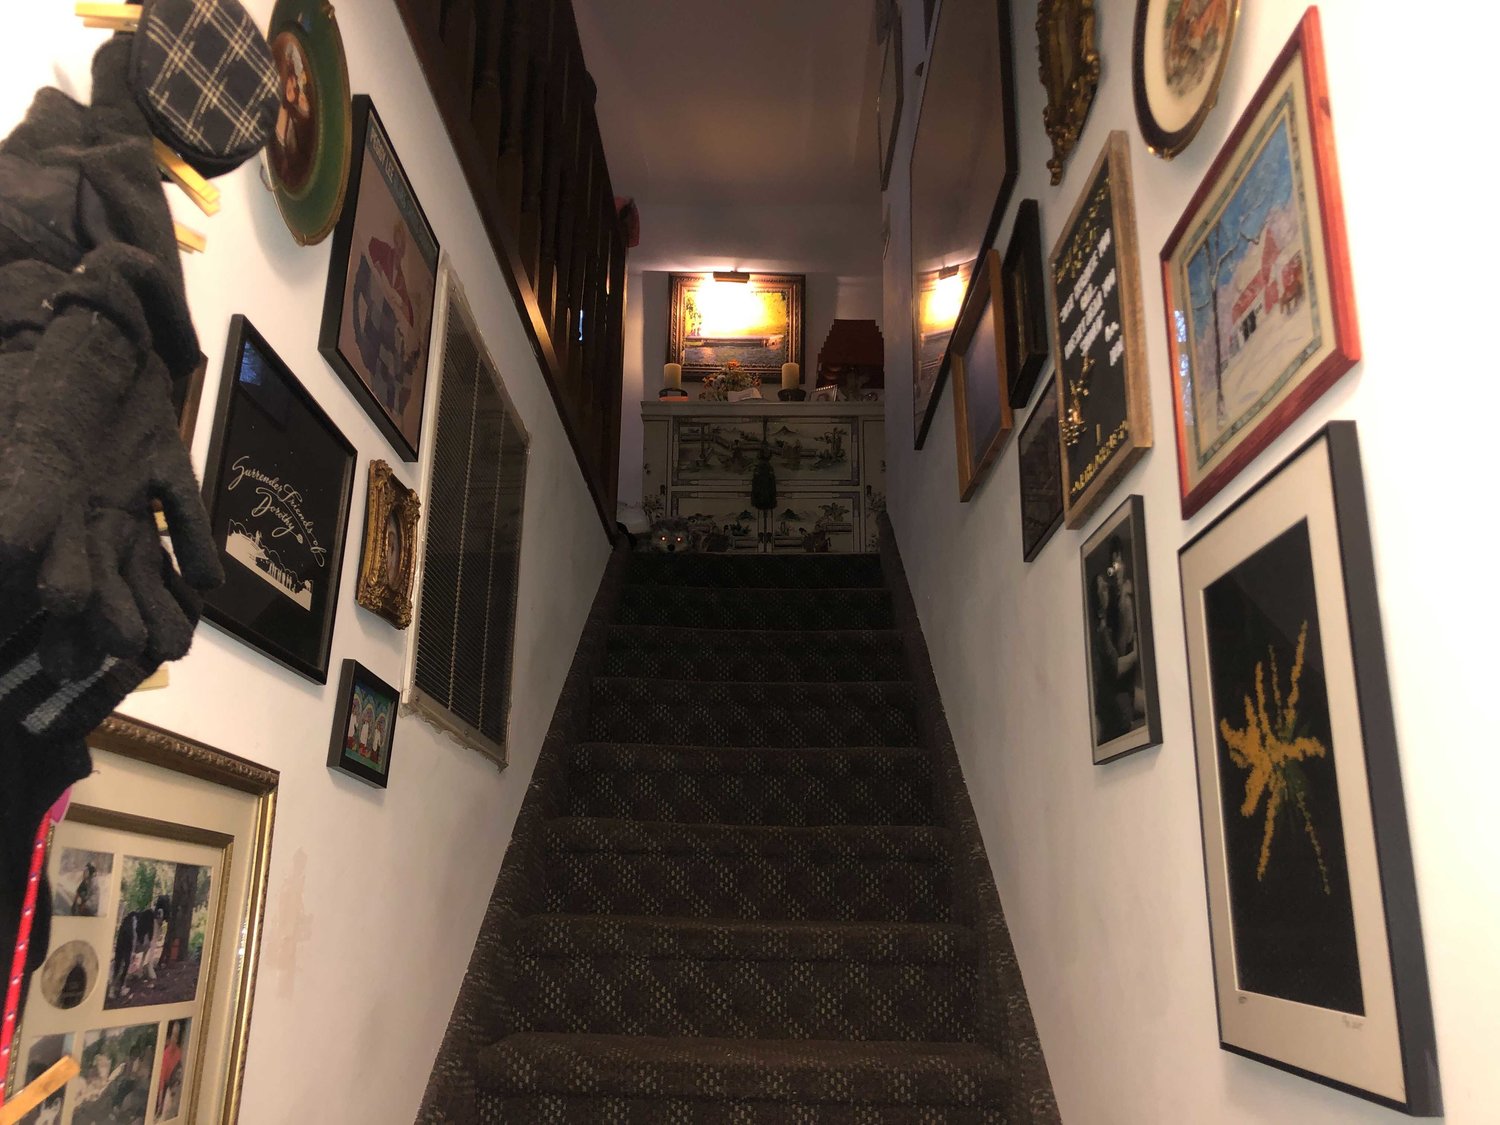 My stairwell gallery here at Camp Fox.